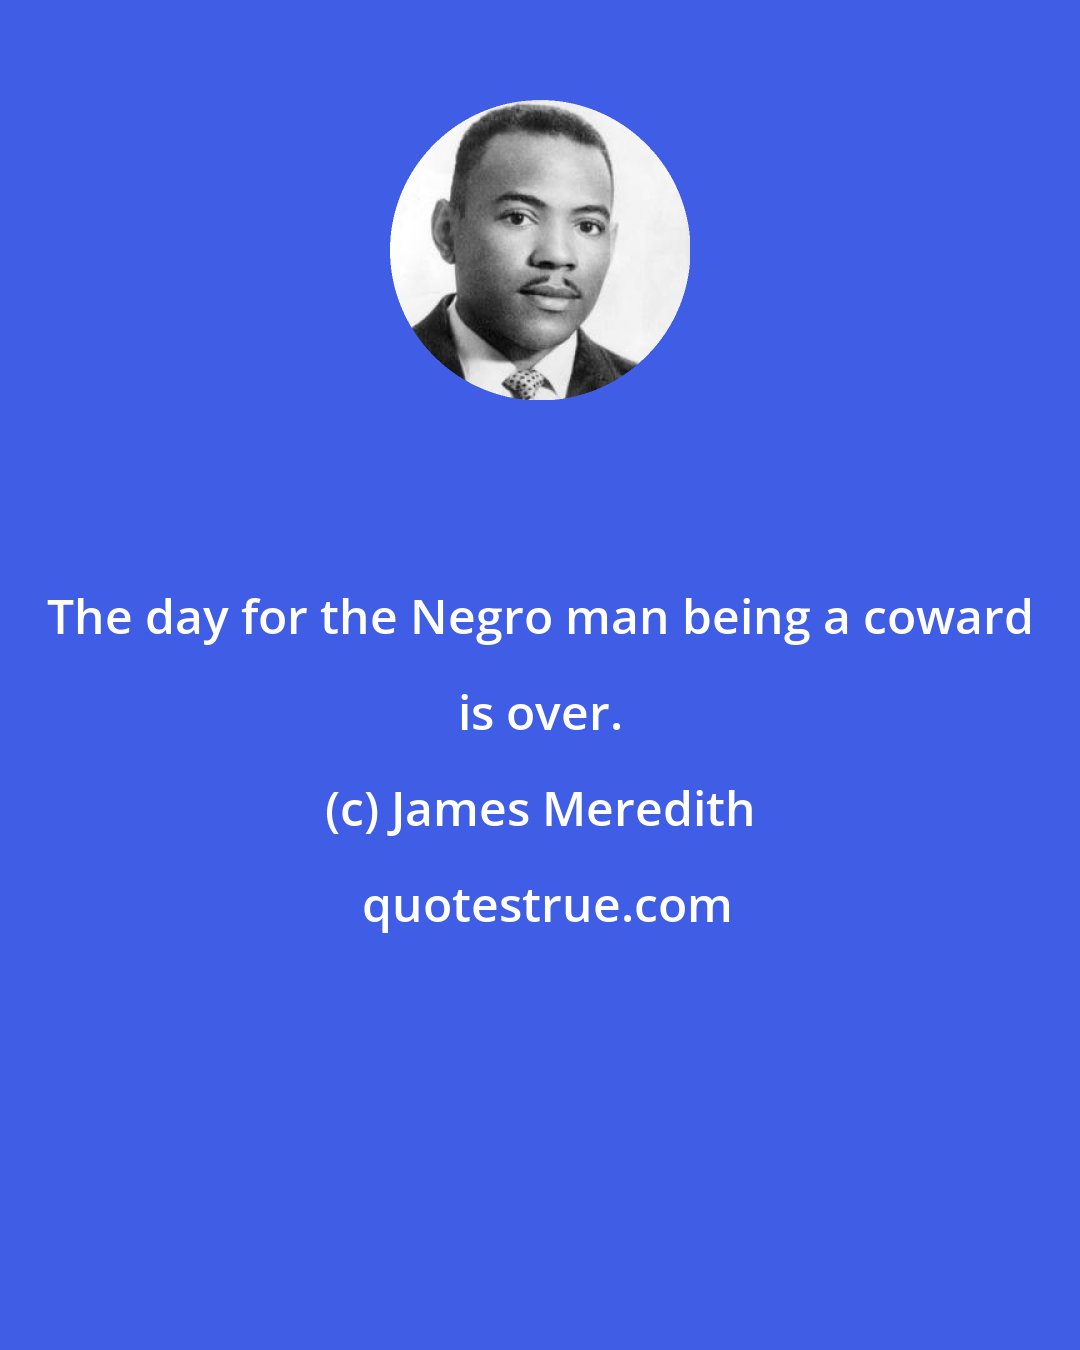 James Meredith: The day for the Negro man being a coward is over.